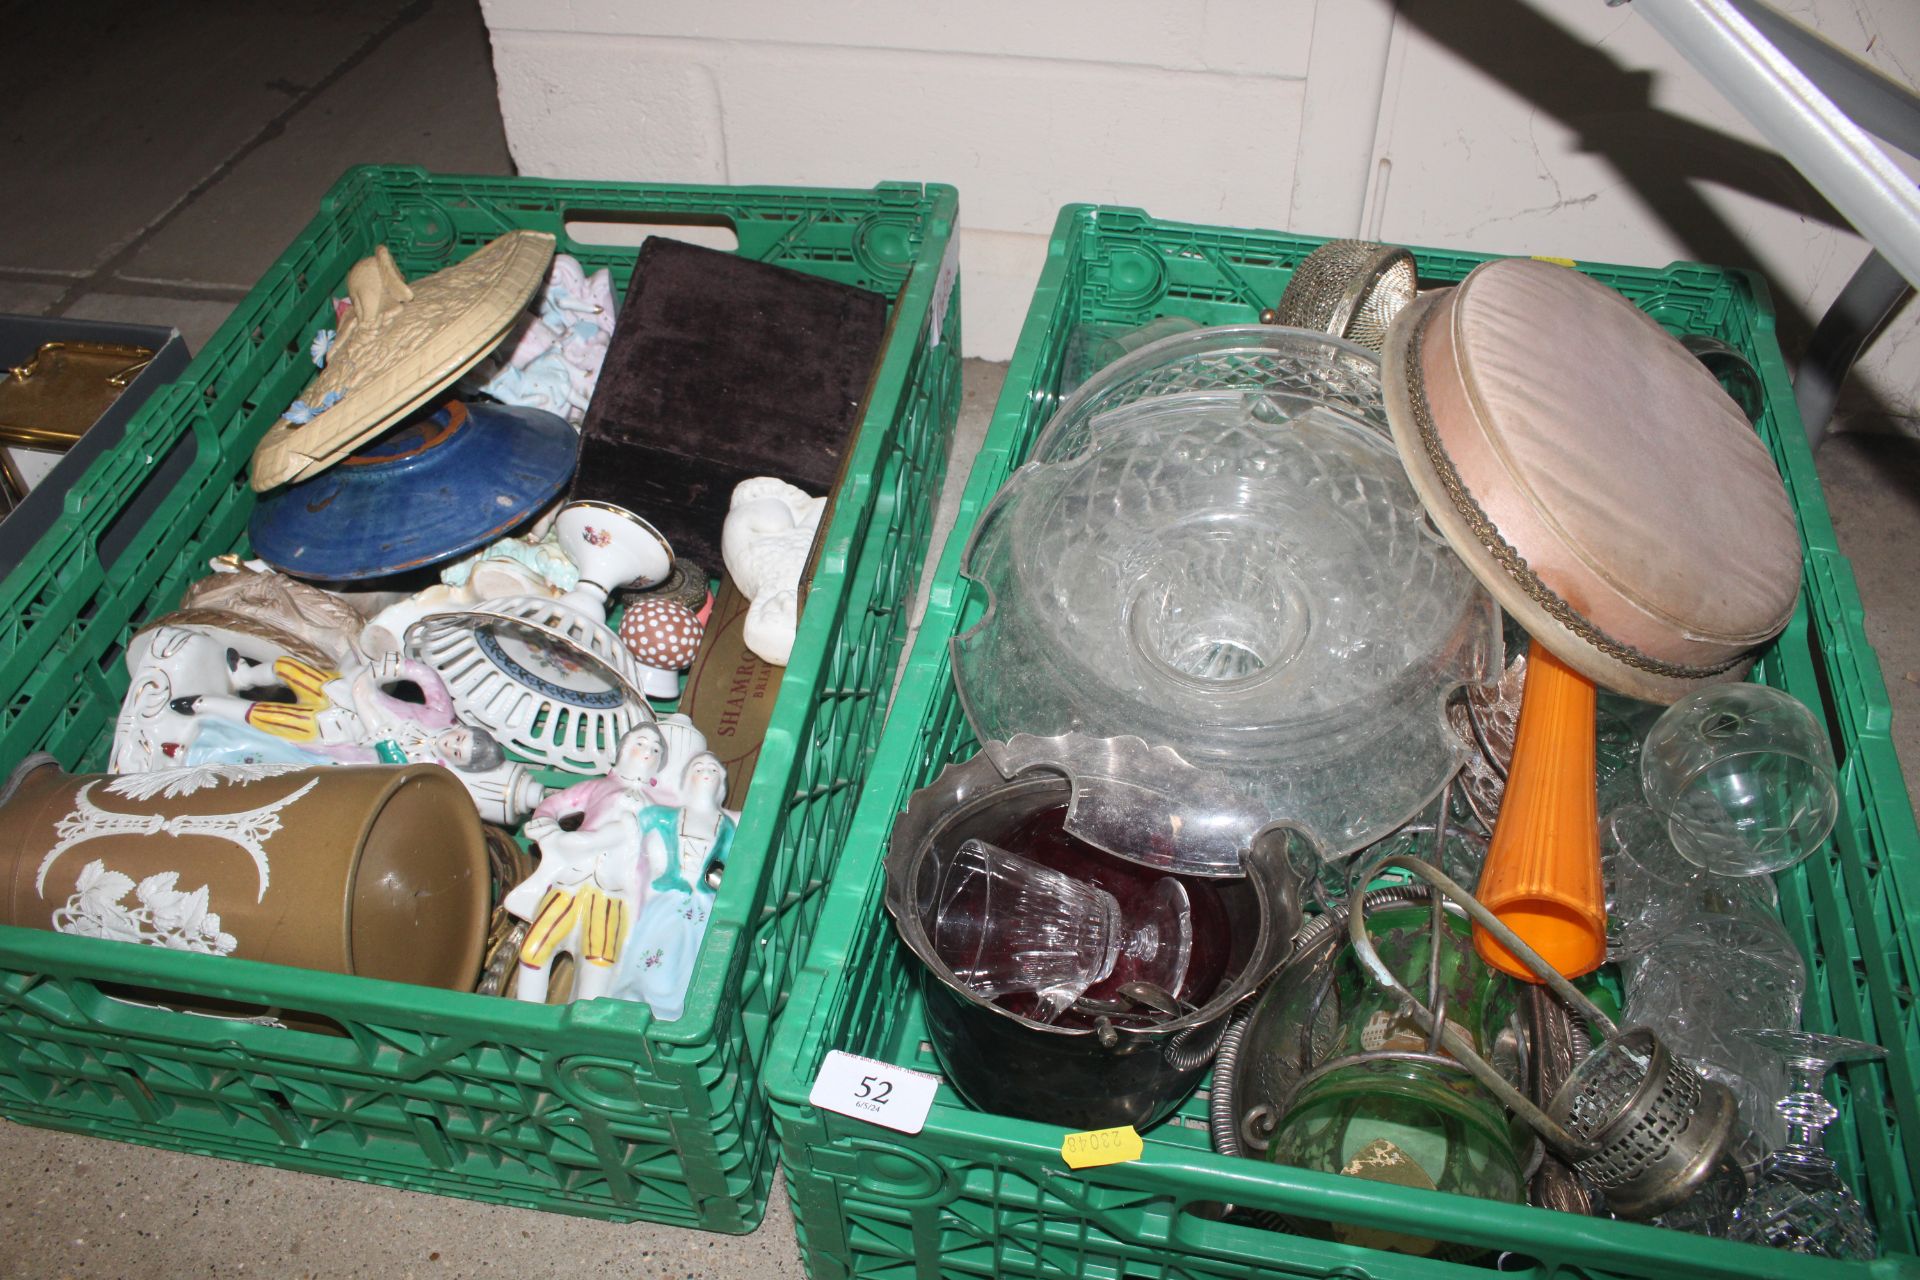 Two boxes of various miscellaneous glass and china